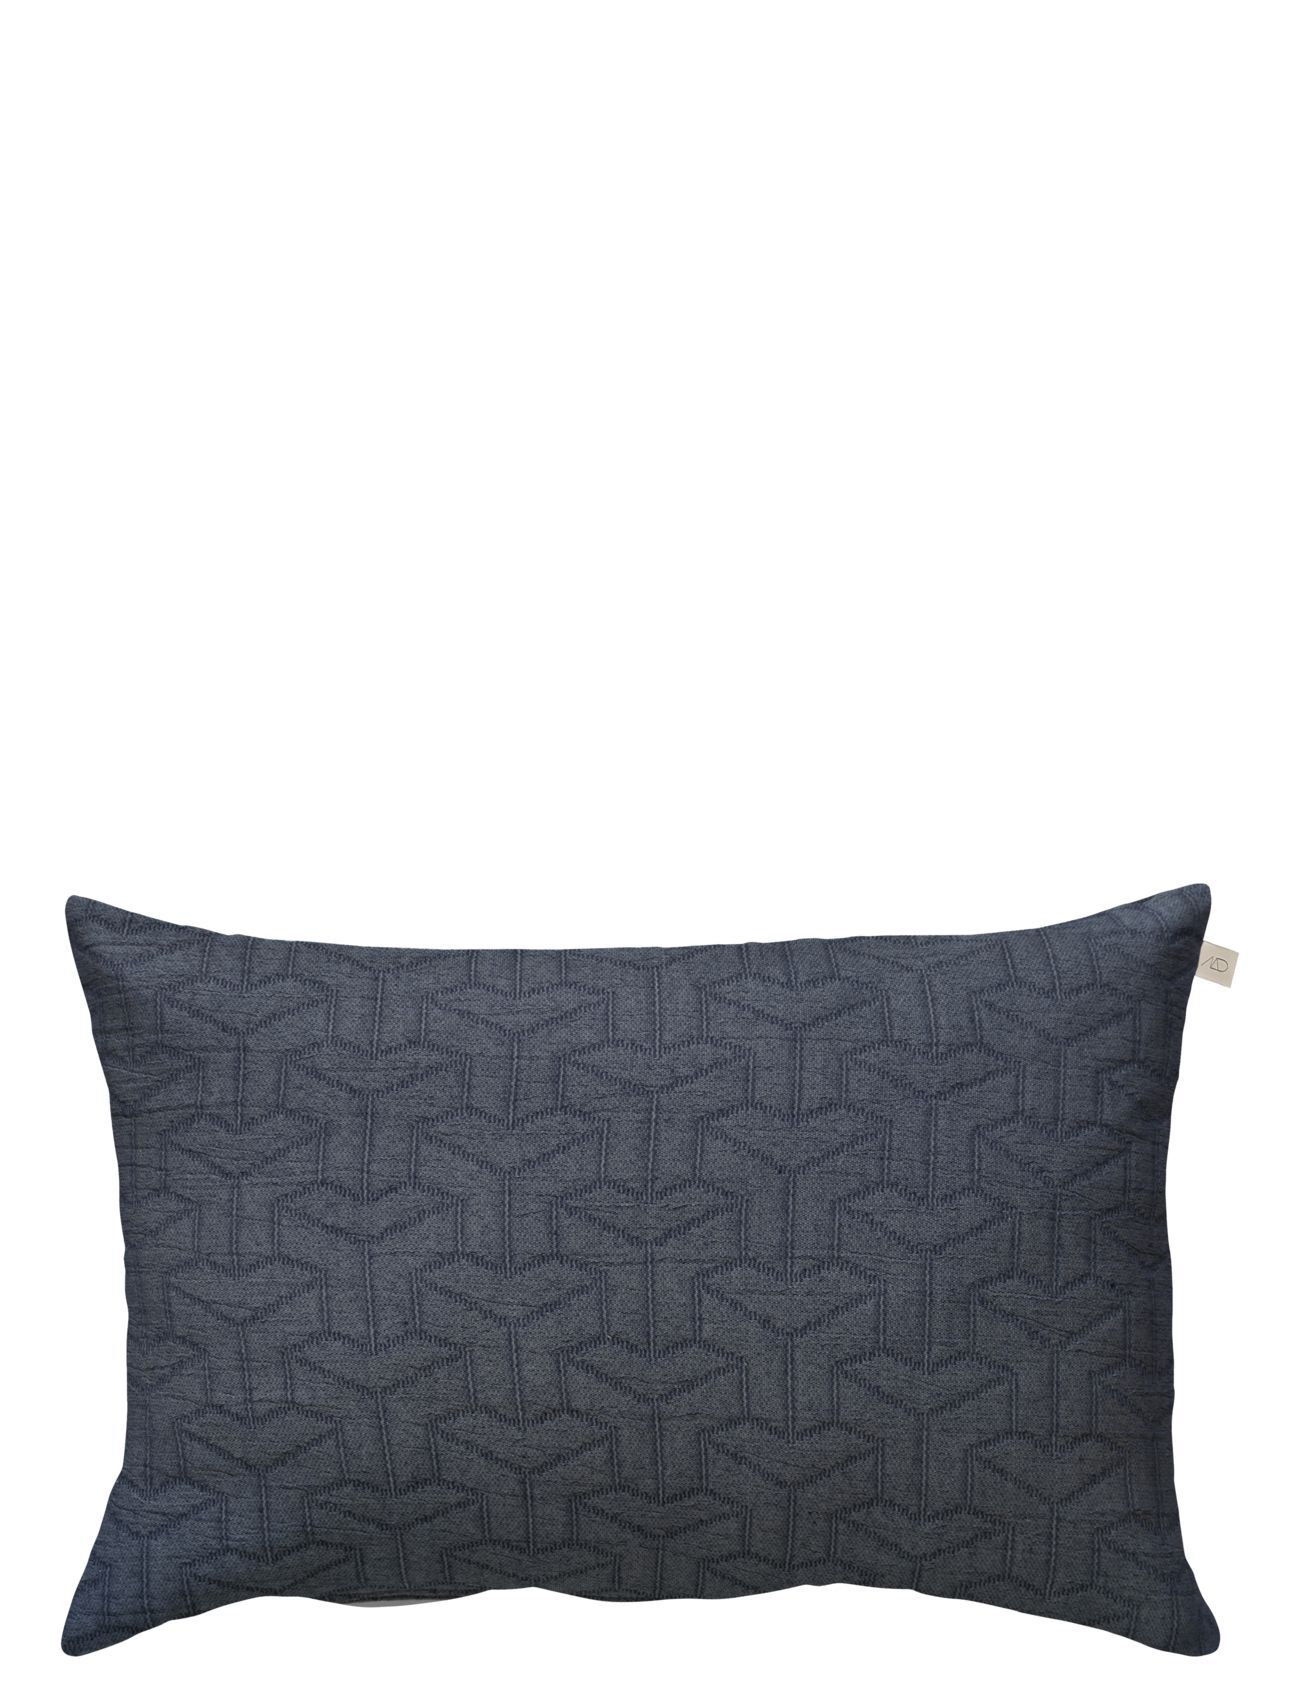 Mette Ditmer Mono Cushion W. Polyester Filling Home Textiles Cushions & Blankets Cushions Blå Mette Ditmer